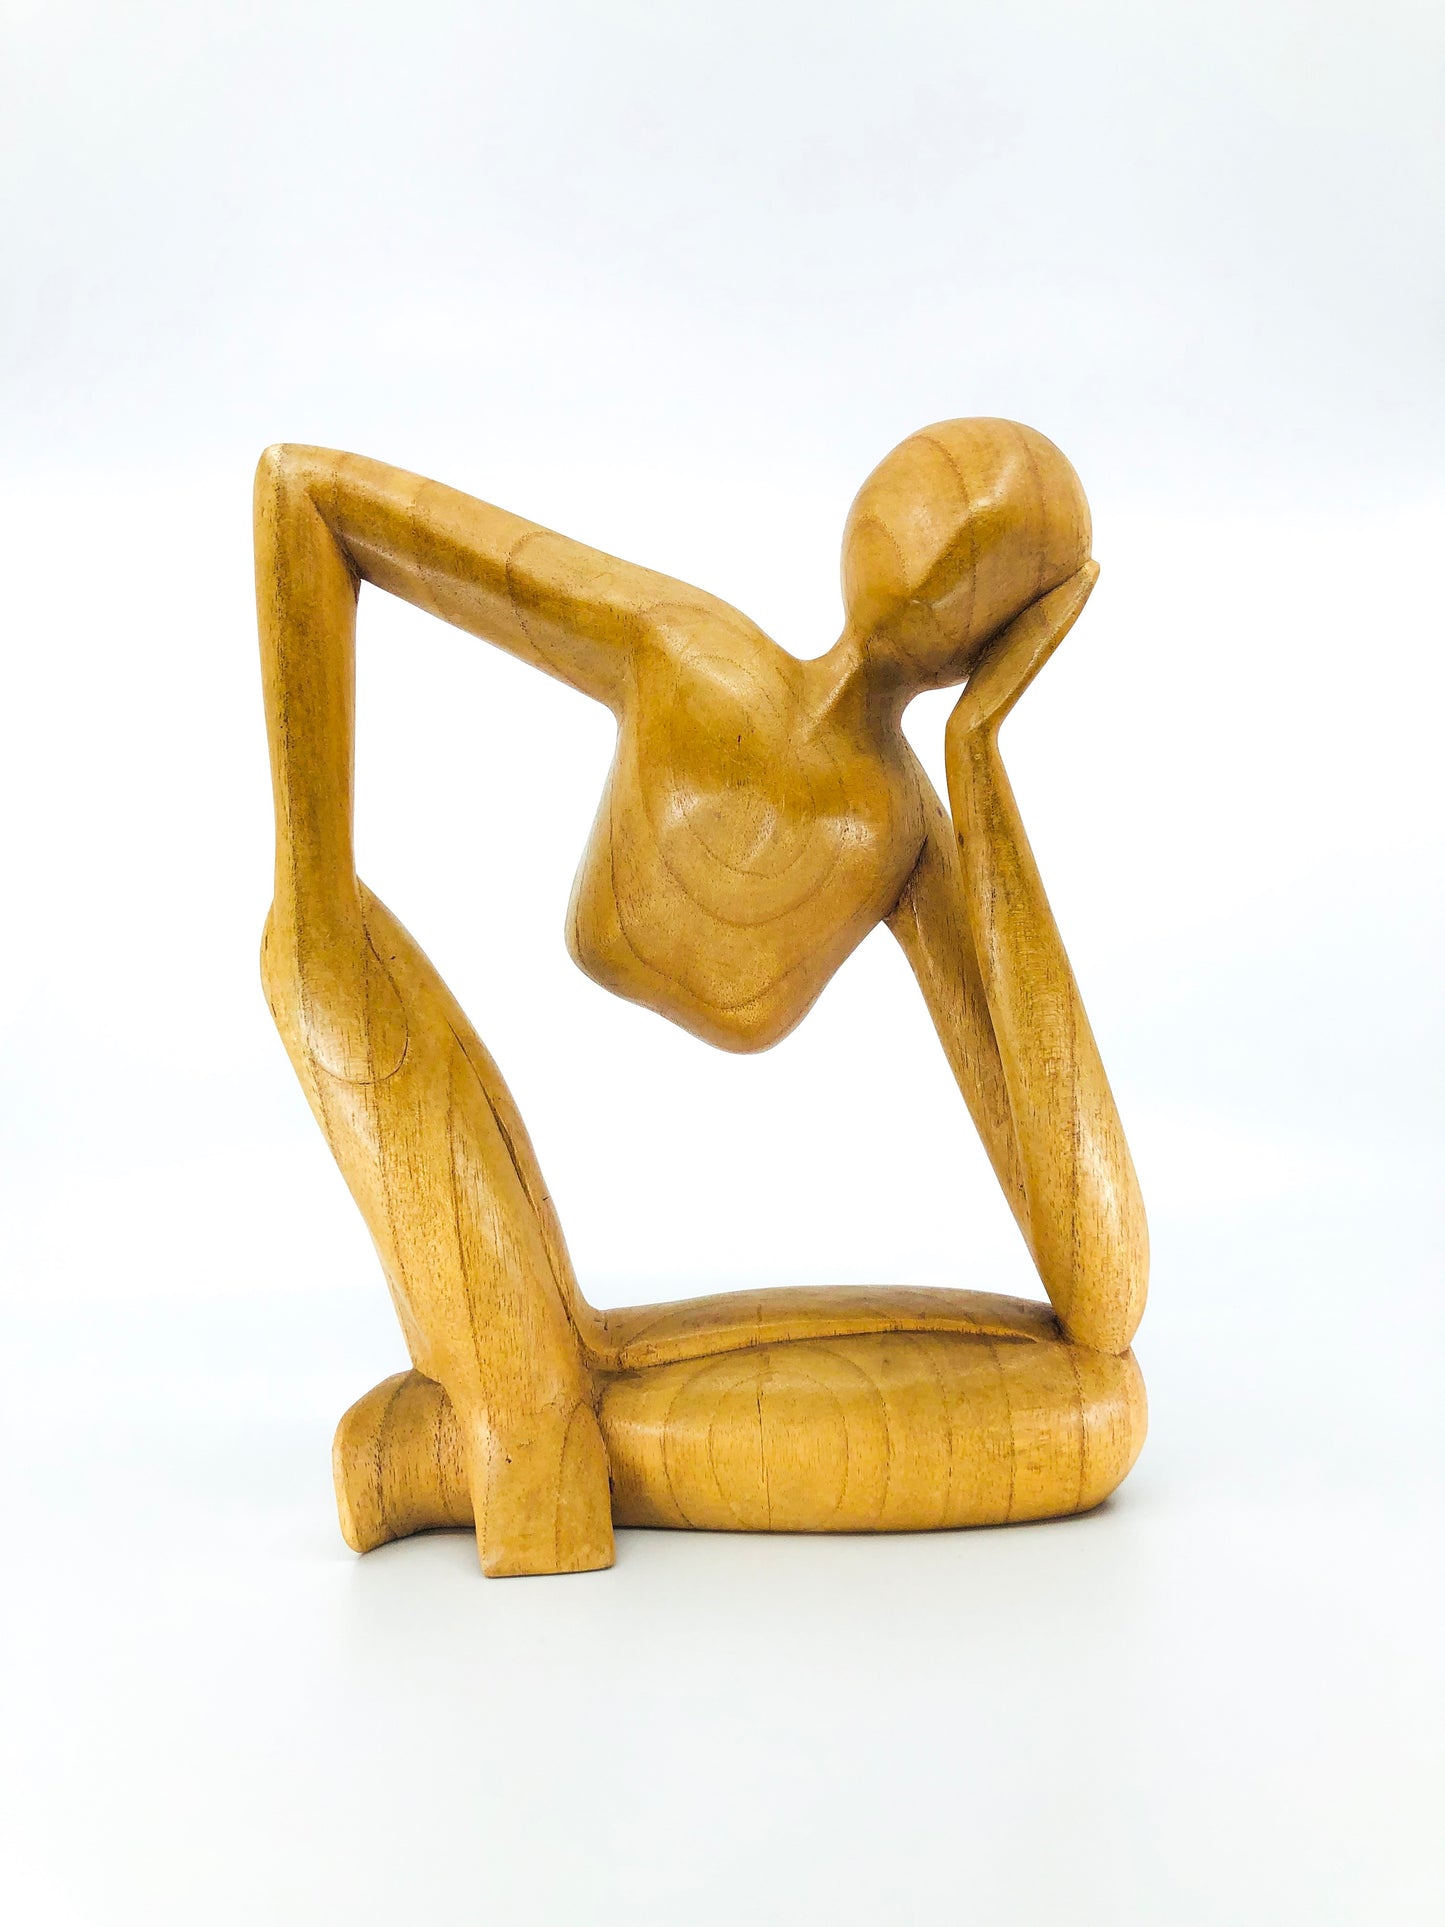 Vintage Hand Carved Wood “Thinking Man”